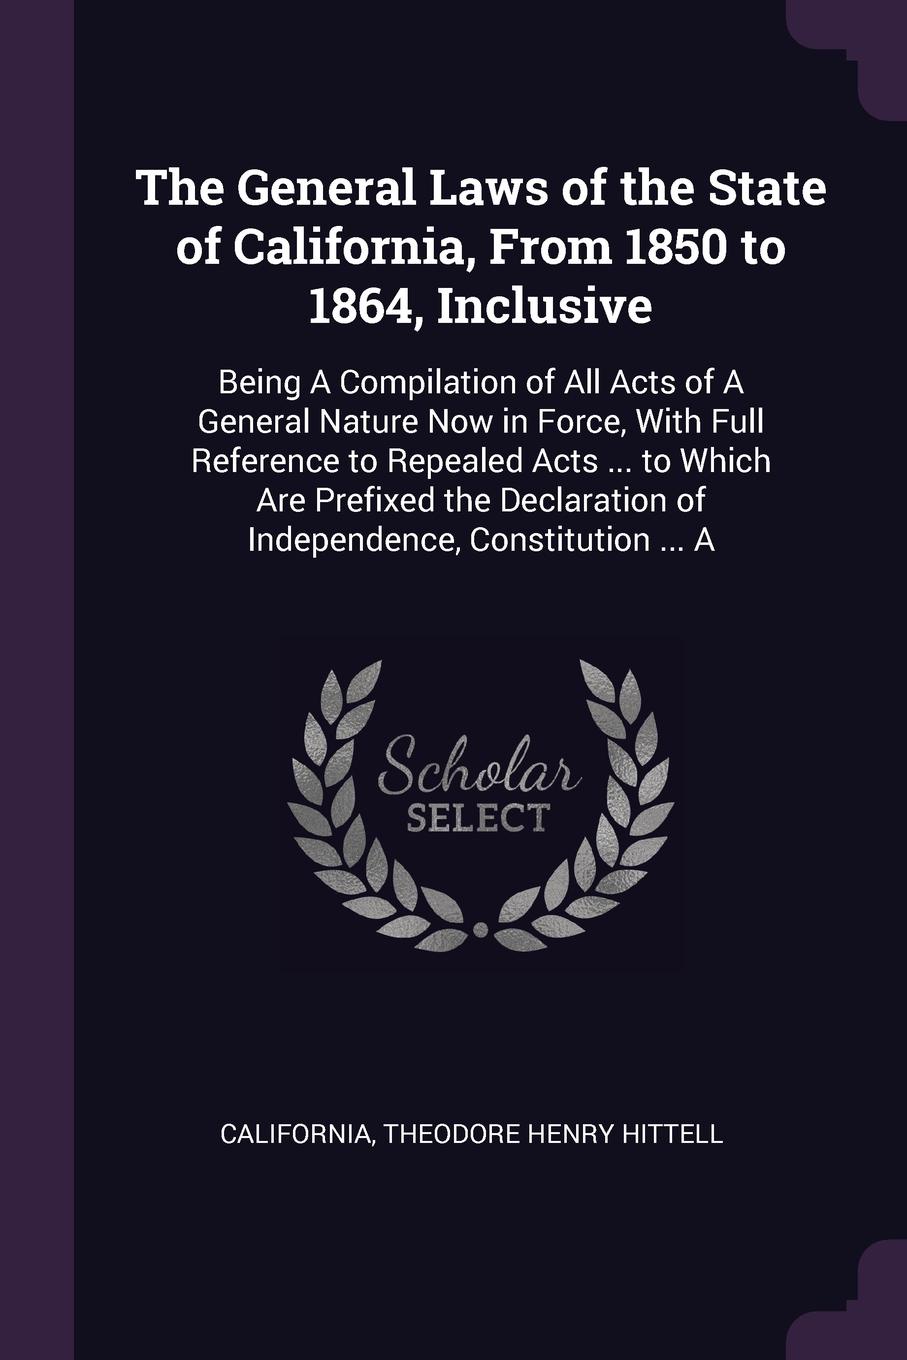 The General Laws of the State of California, From 1850 to 1864, Inclusive. Being A Compilation of All Acts of A General Nature Now in Force, With Full Reference to Repealed Acts ... to Which Are Prefixed the Declaration of Independence, Constituti...